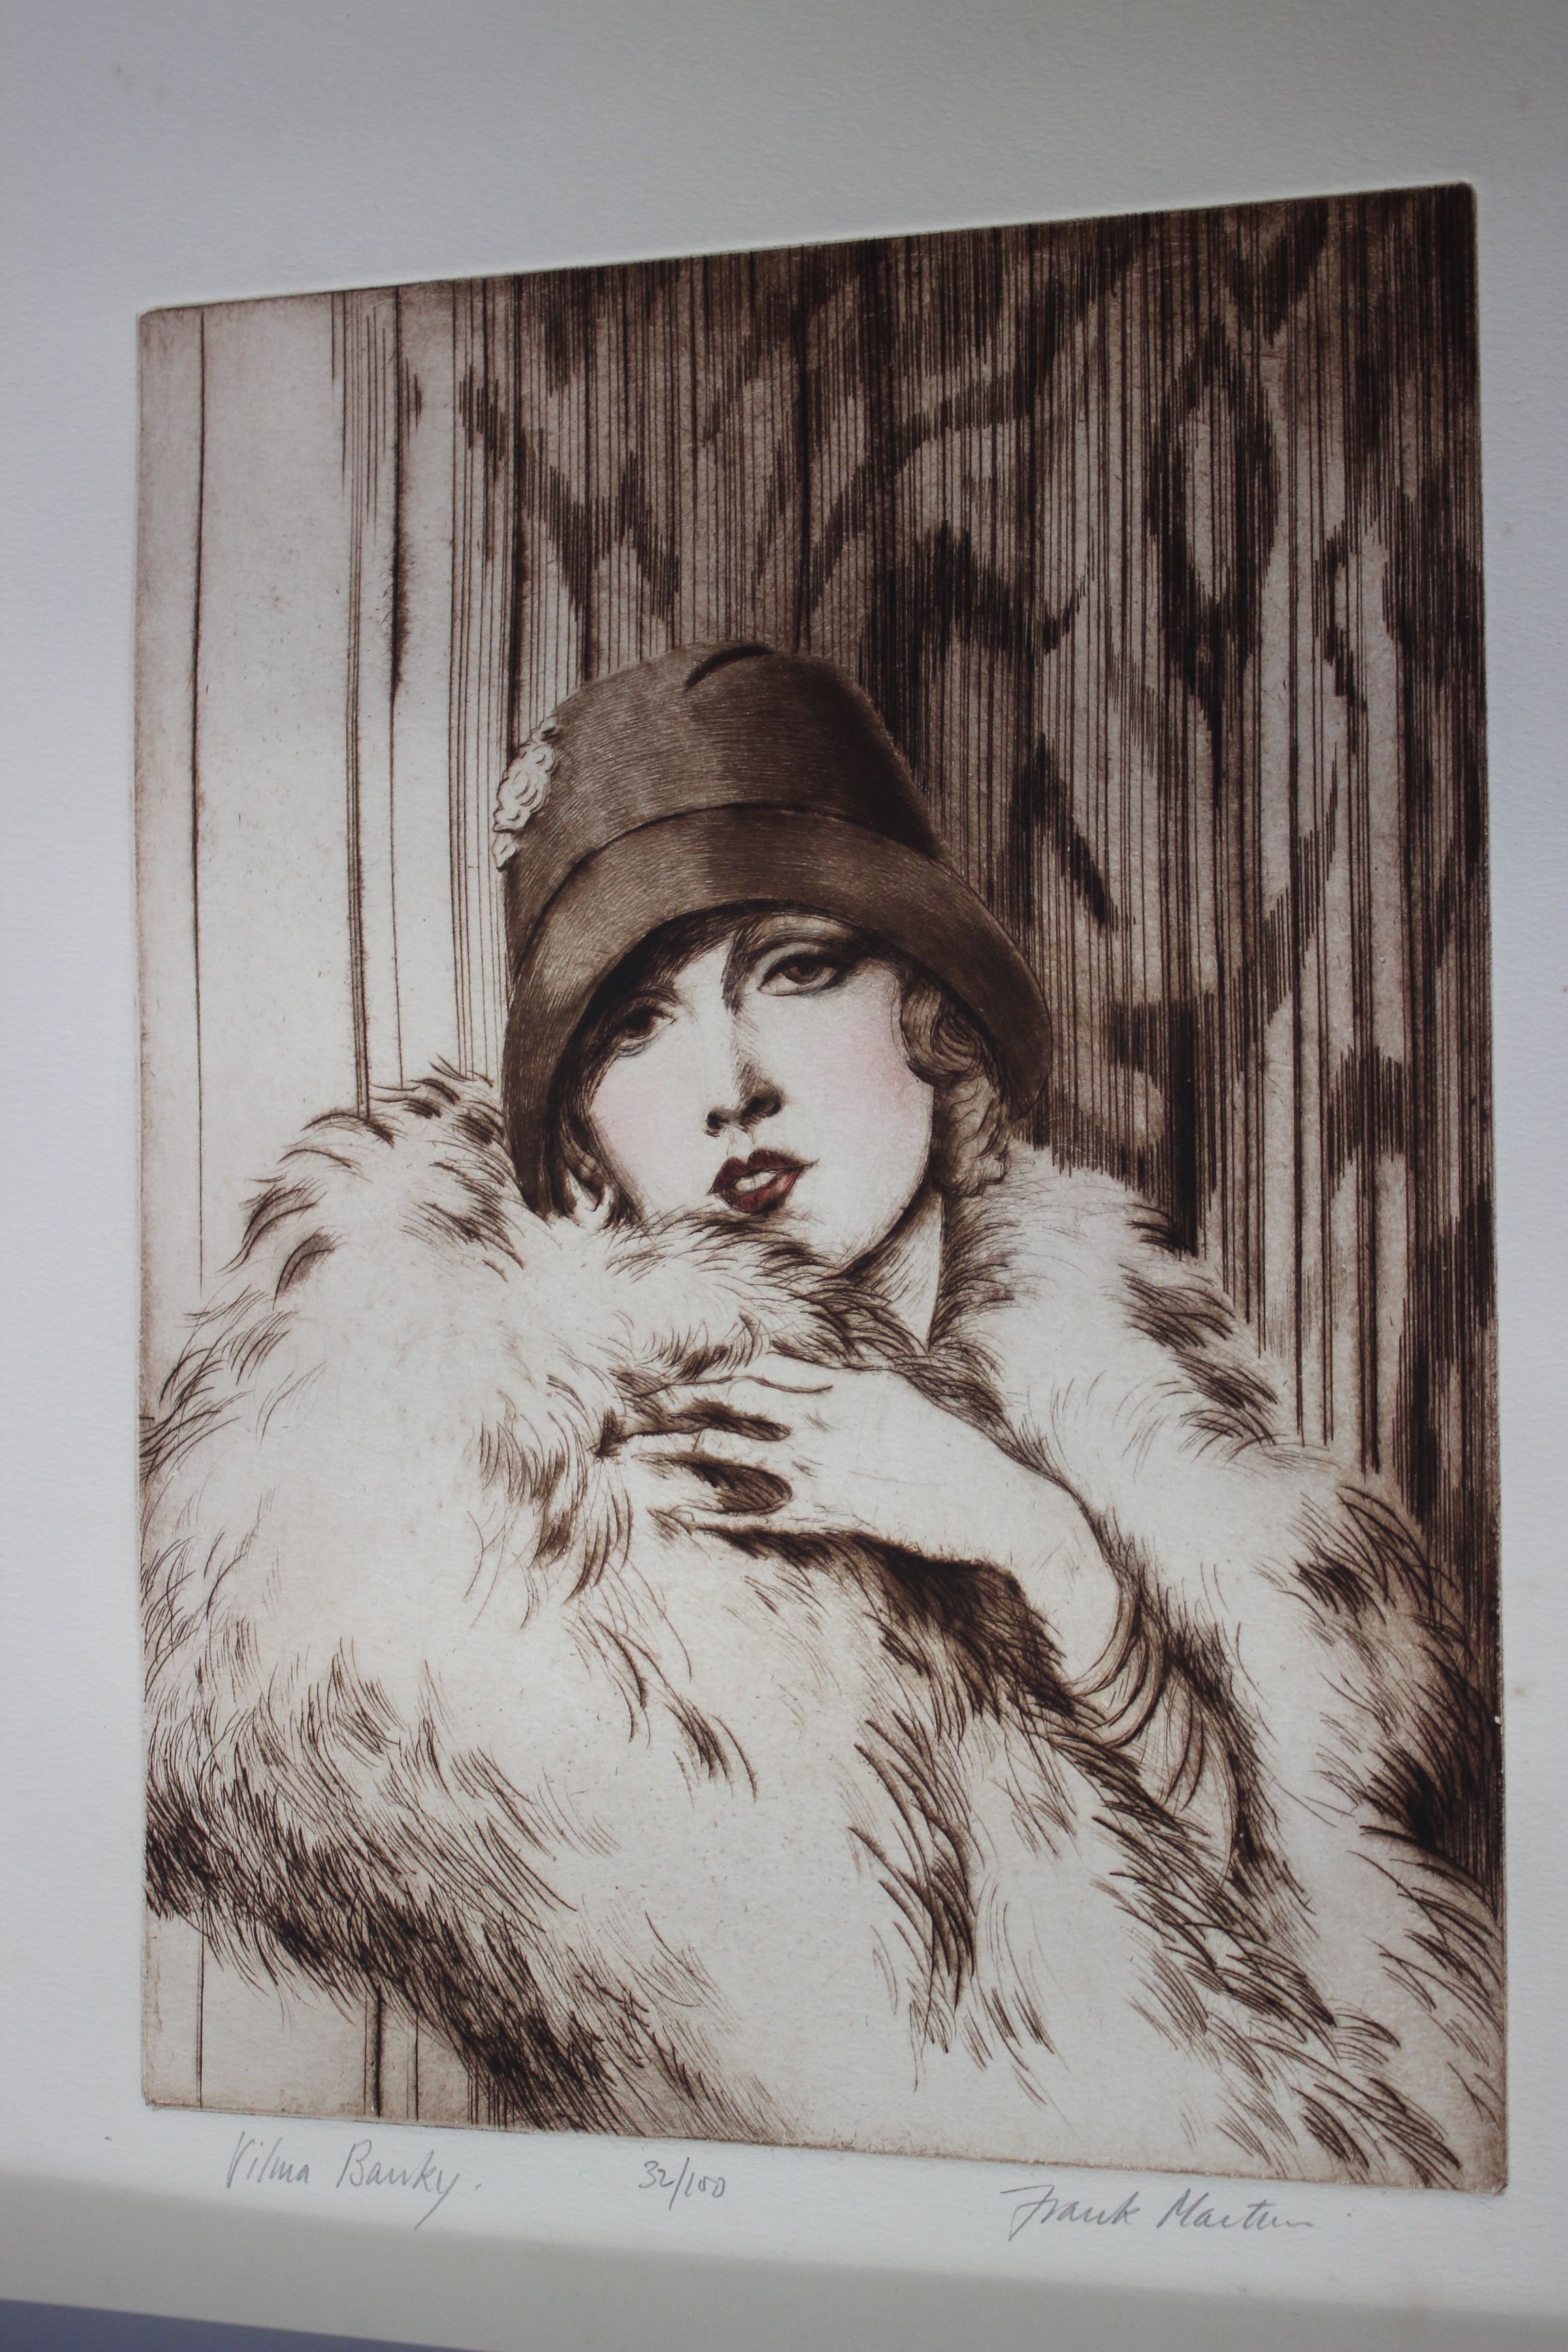 Frank MartinA Portrait of Louise BrookesDry-point engraving, limited edition 32/100And another of